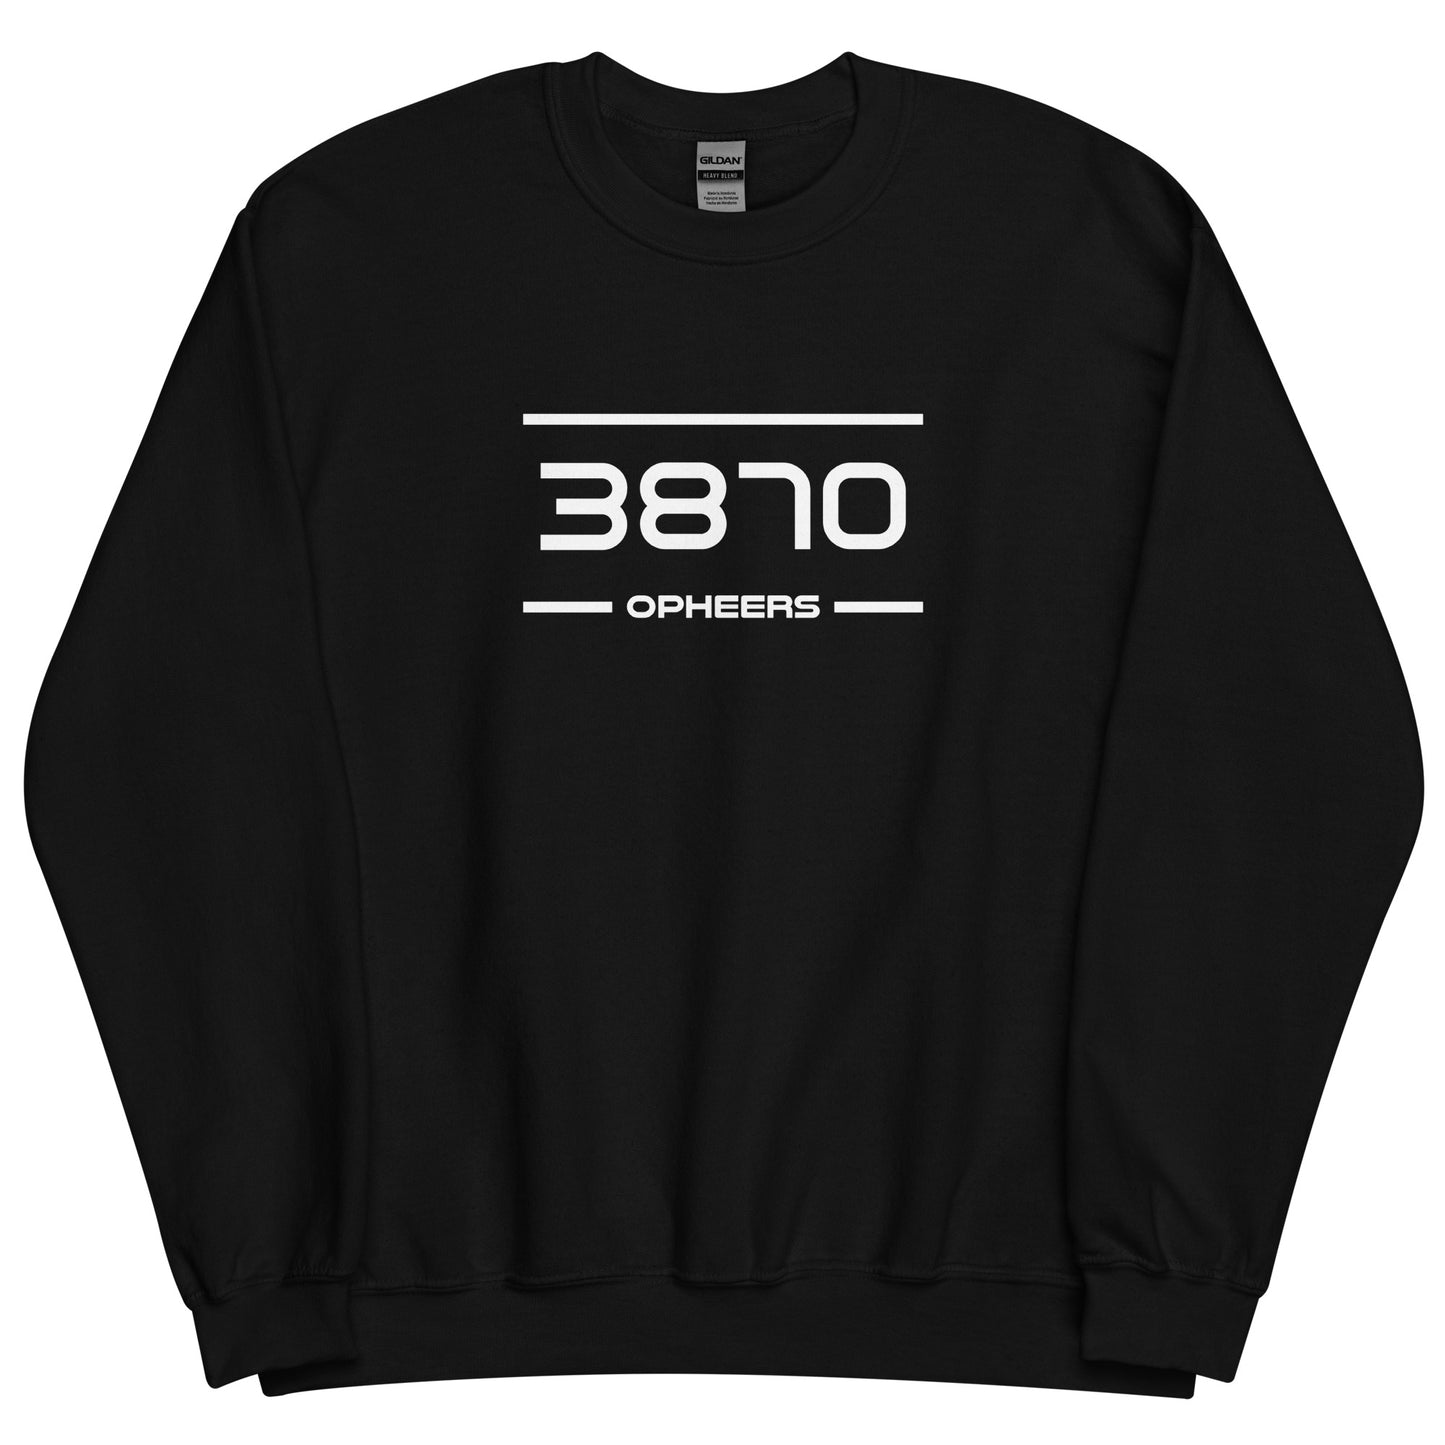 Sweater - 3870 - Opheers (M/V)